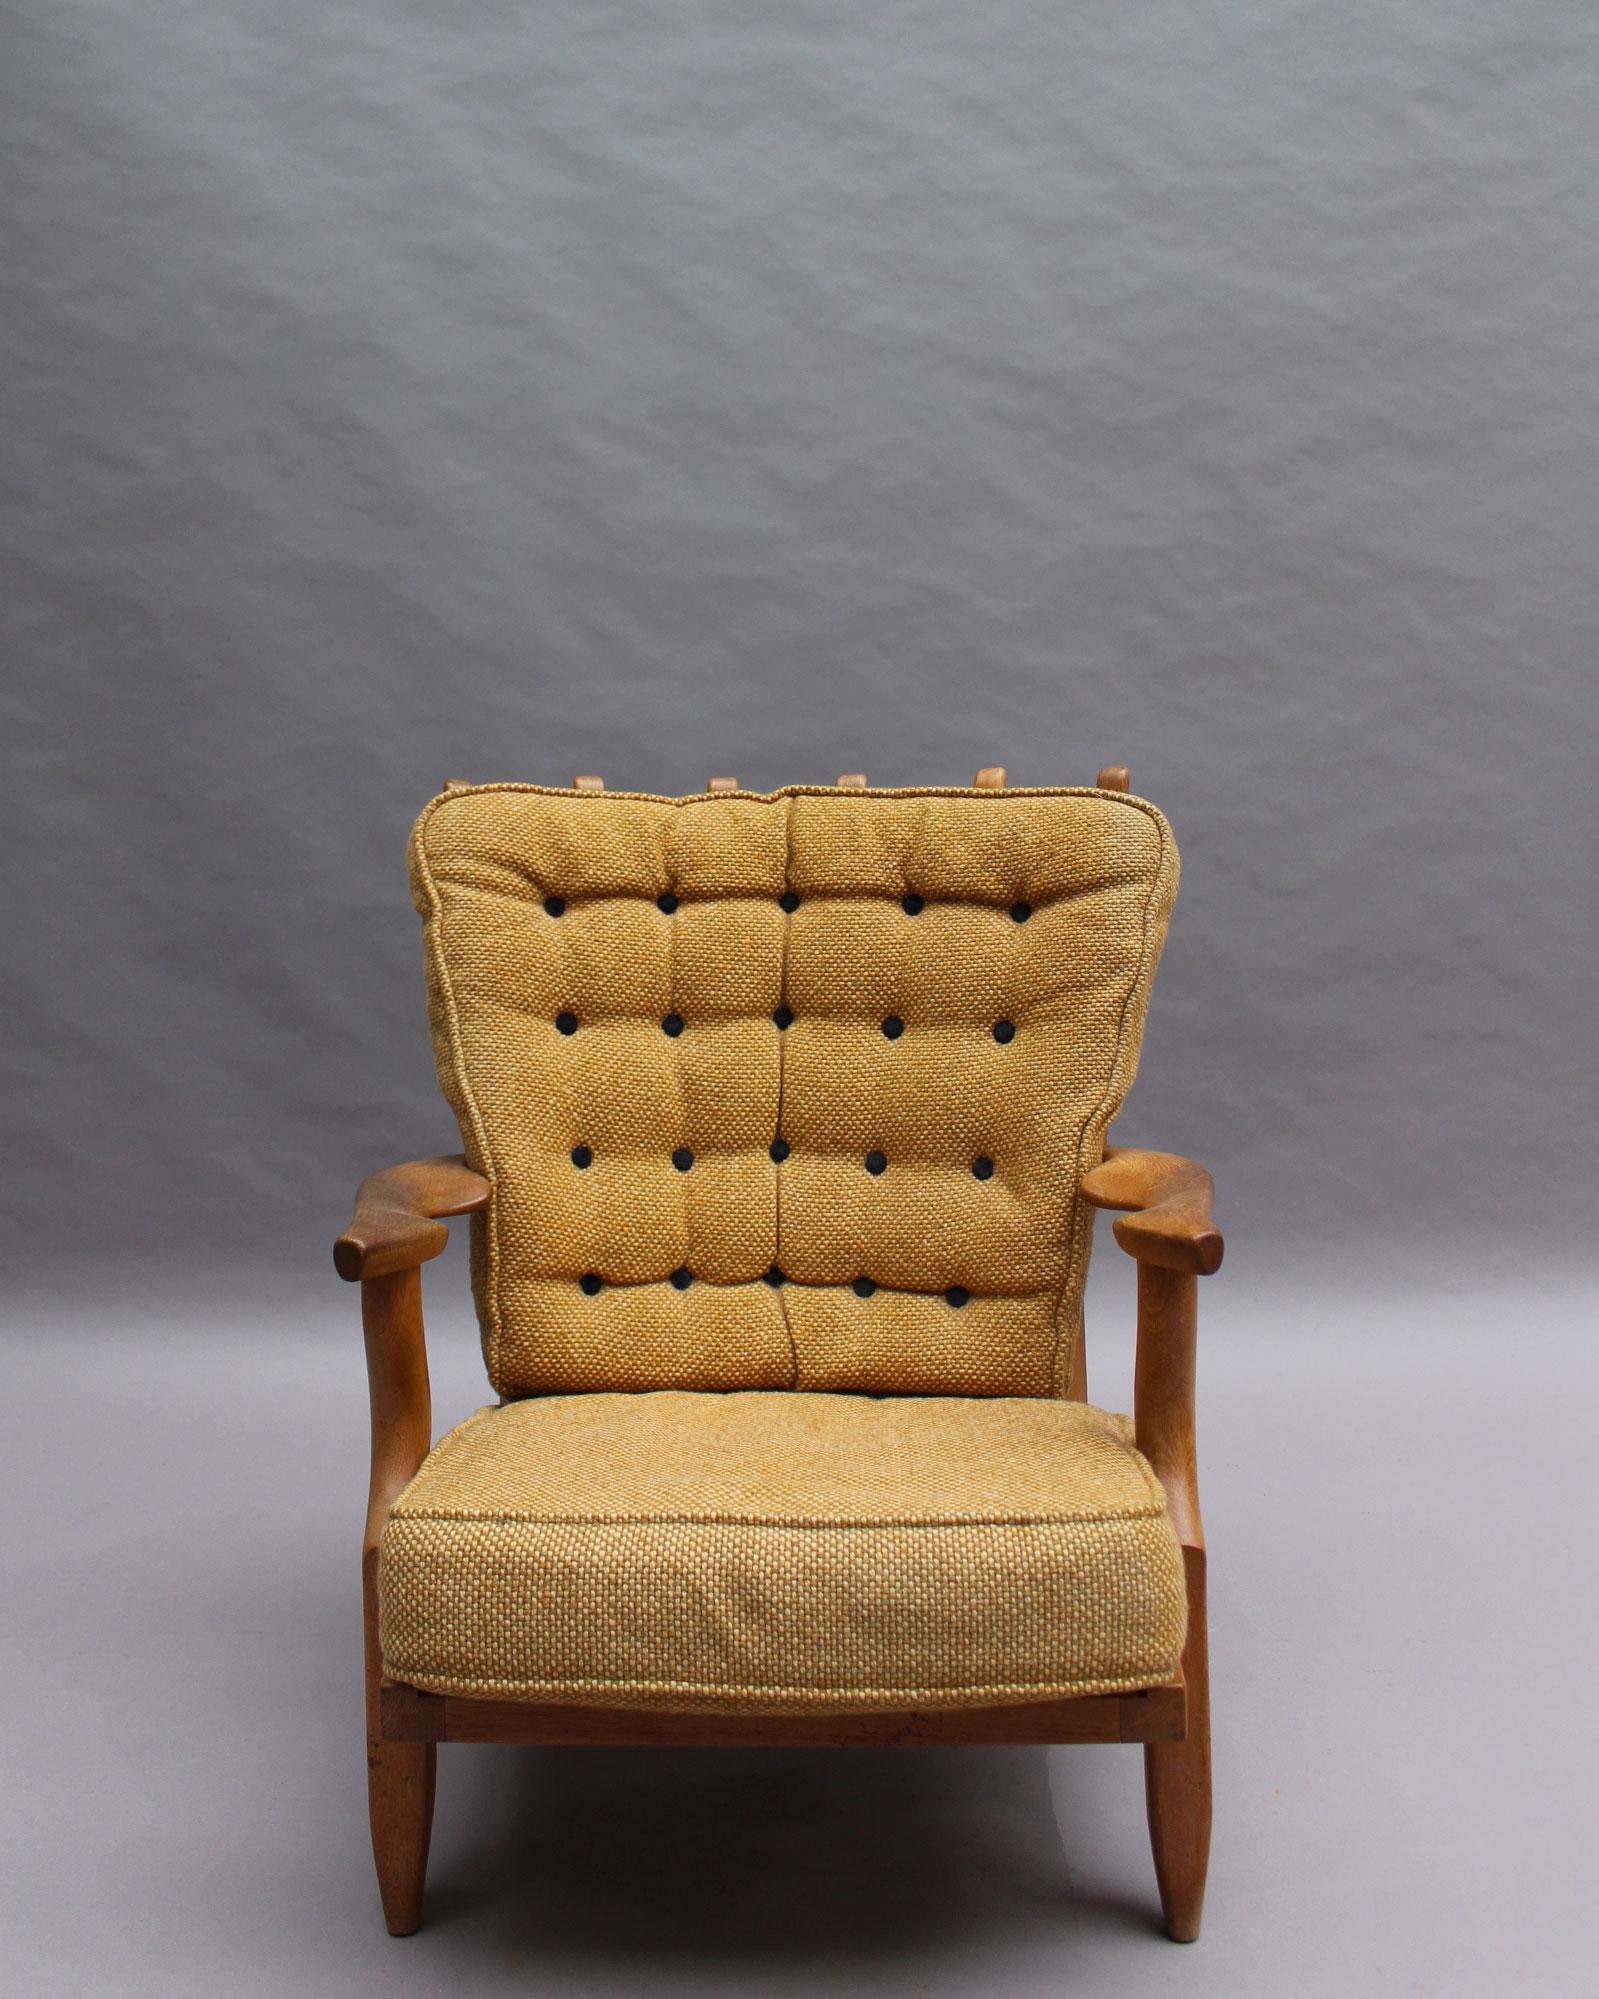 Robert Guillerme & Jacques Chambron - A French midcentury “Grand Repos” armchair in solid oak with its original fabric.